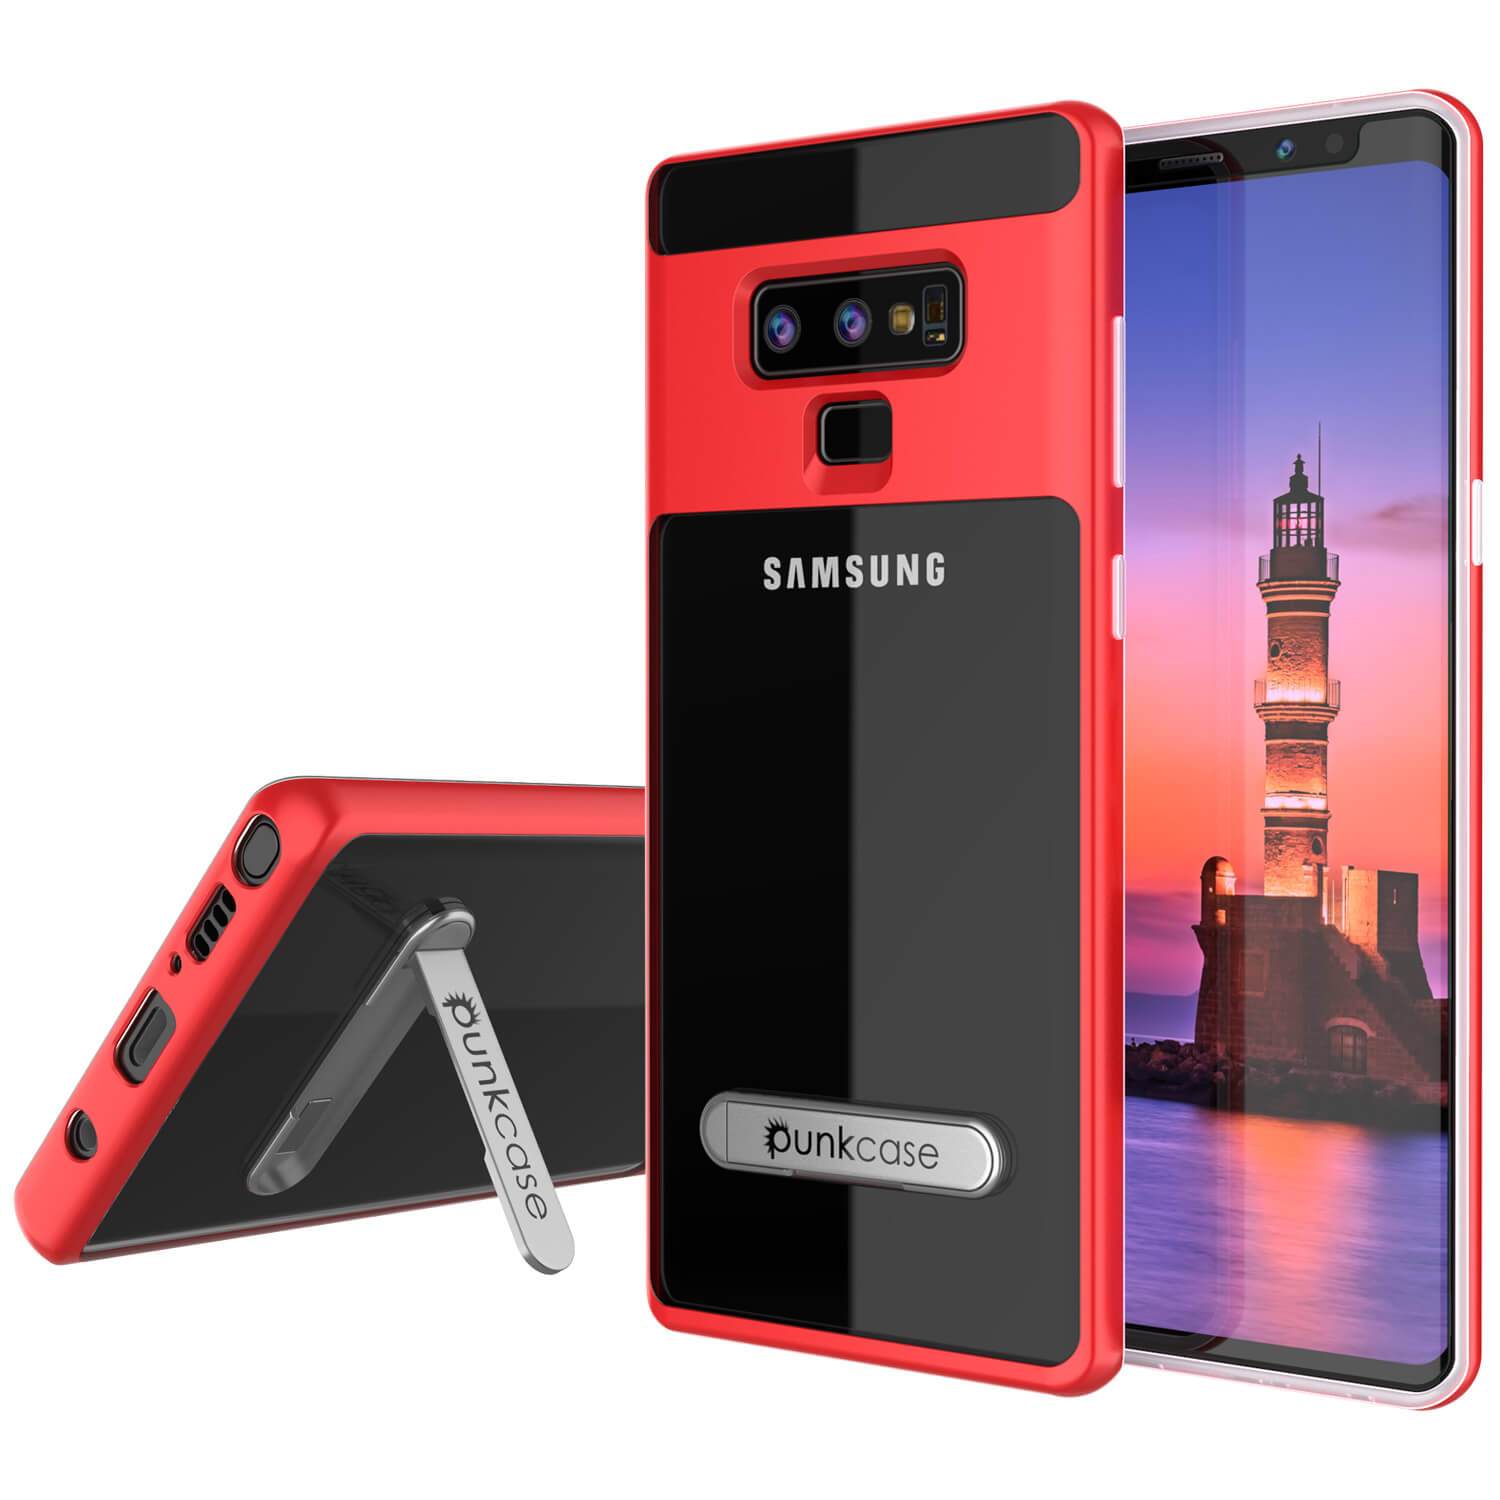 Galaxy Note 9 Lucid 3.0 PunkCase Armor Cover w/Integrated Kickstand and Screen Protector [Red]